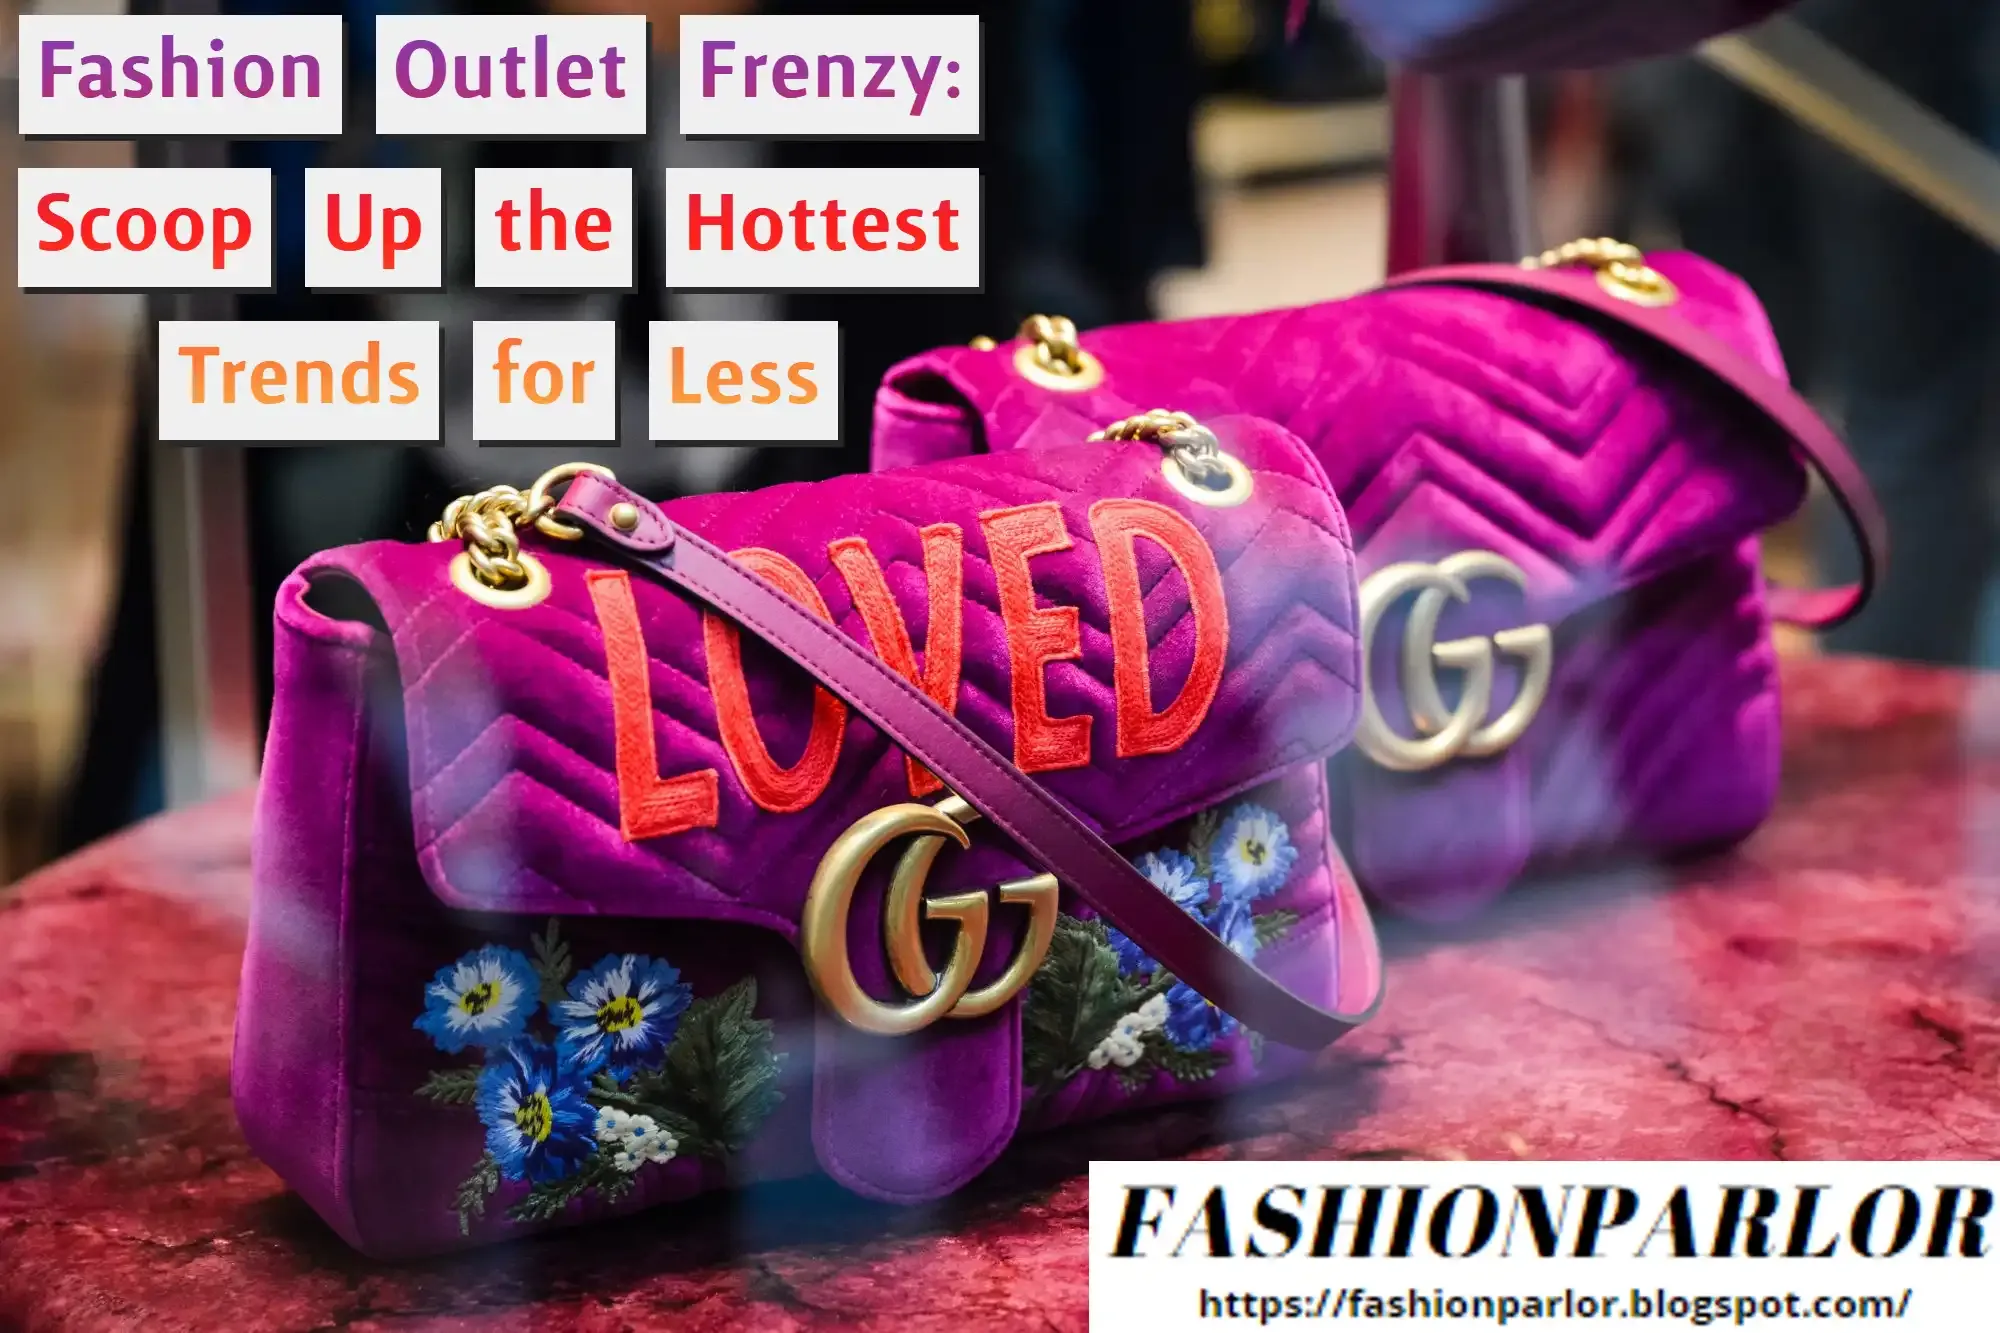 fashion-outlet-frenzy-scoop-up-the-hottest-trends-for-less